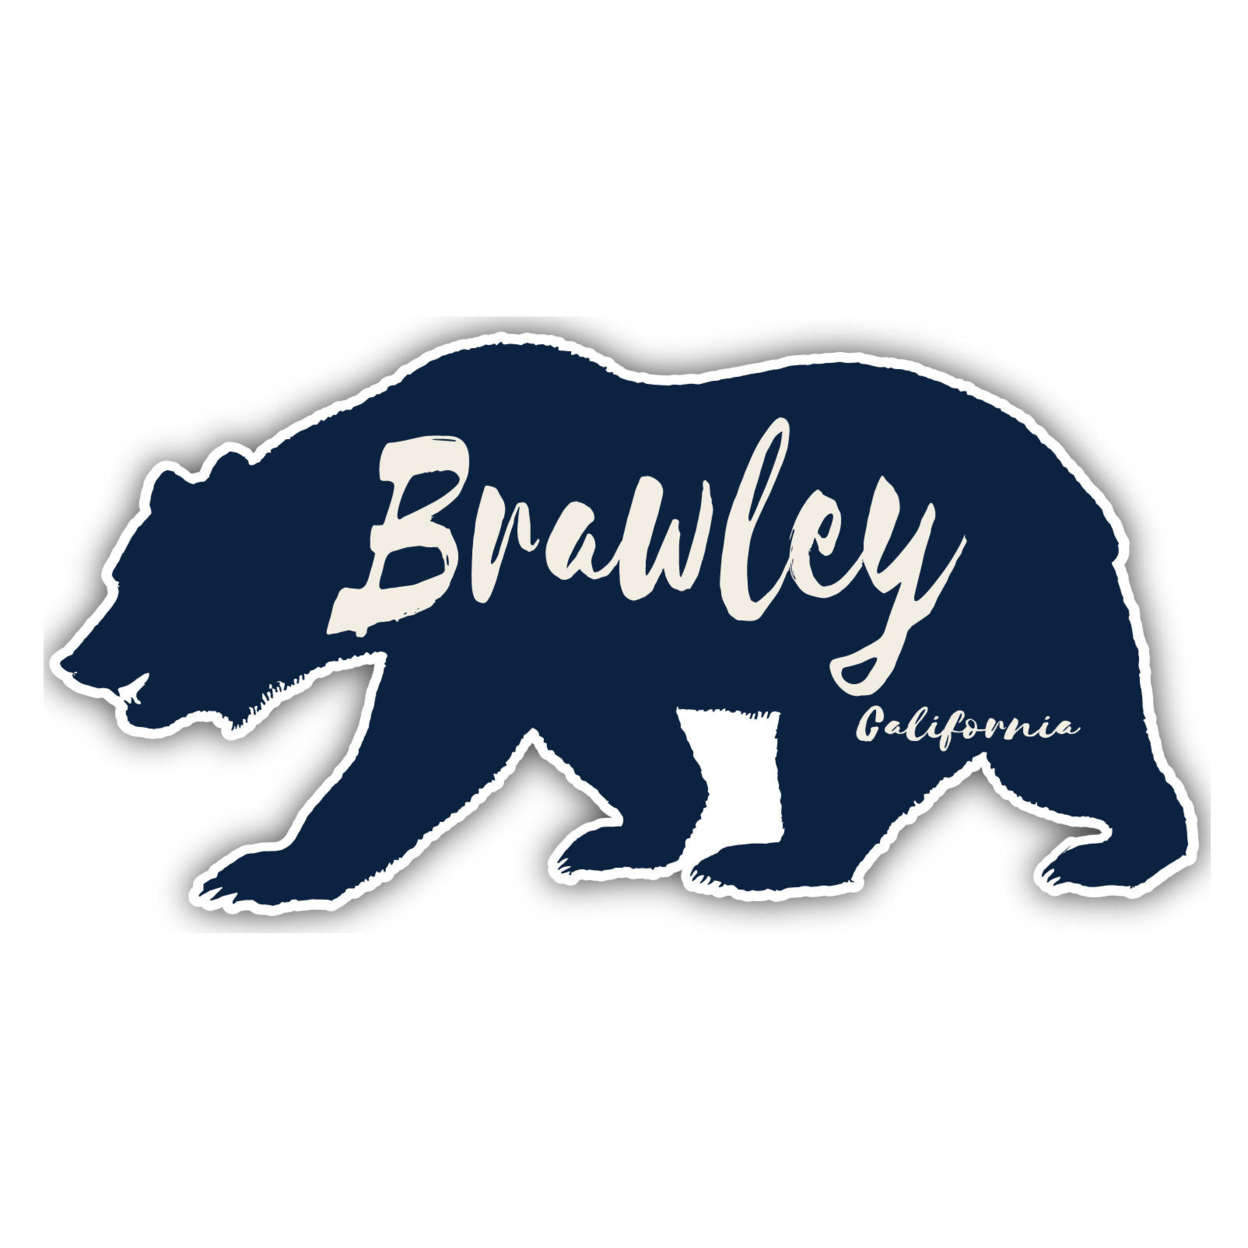 Brawley California Souvenir Decorative Stickers (Choose Theme And Size) - 4-Pack, 10-Inch, Bear